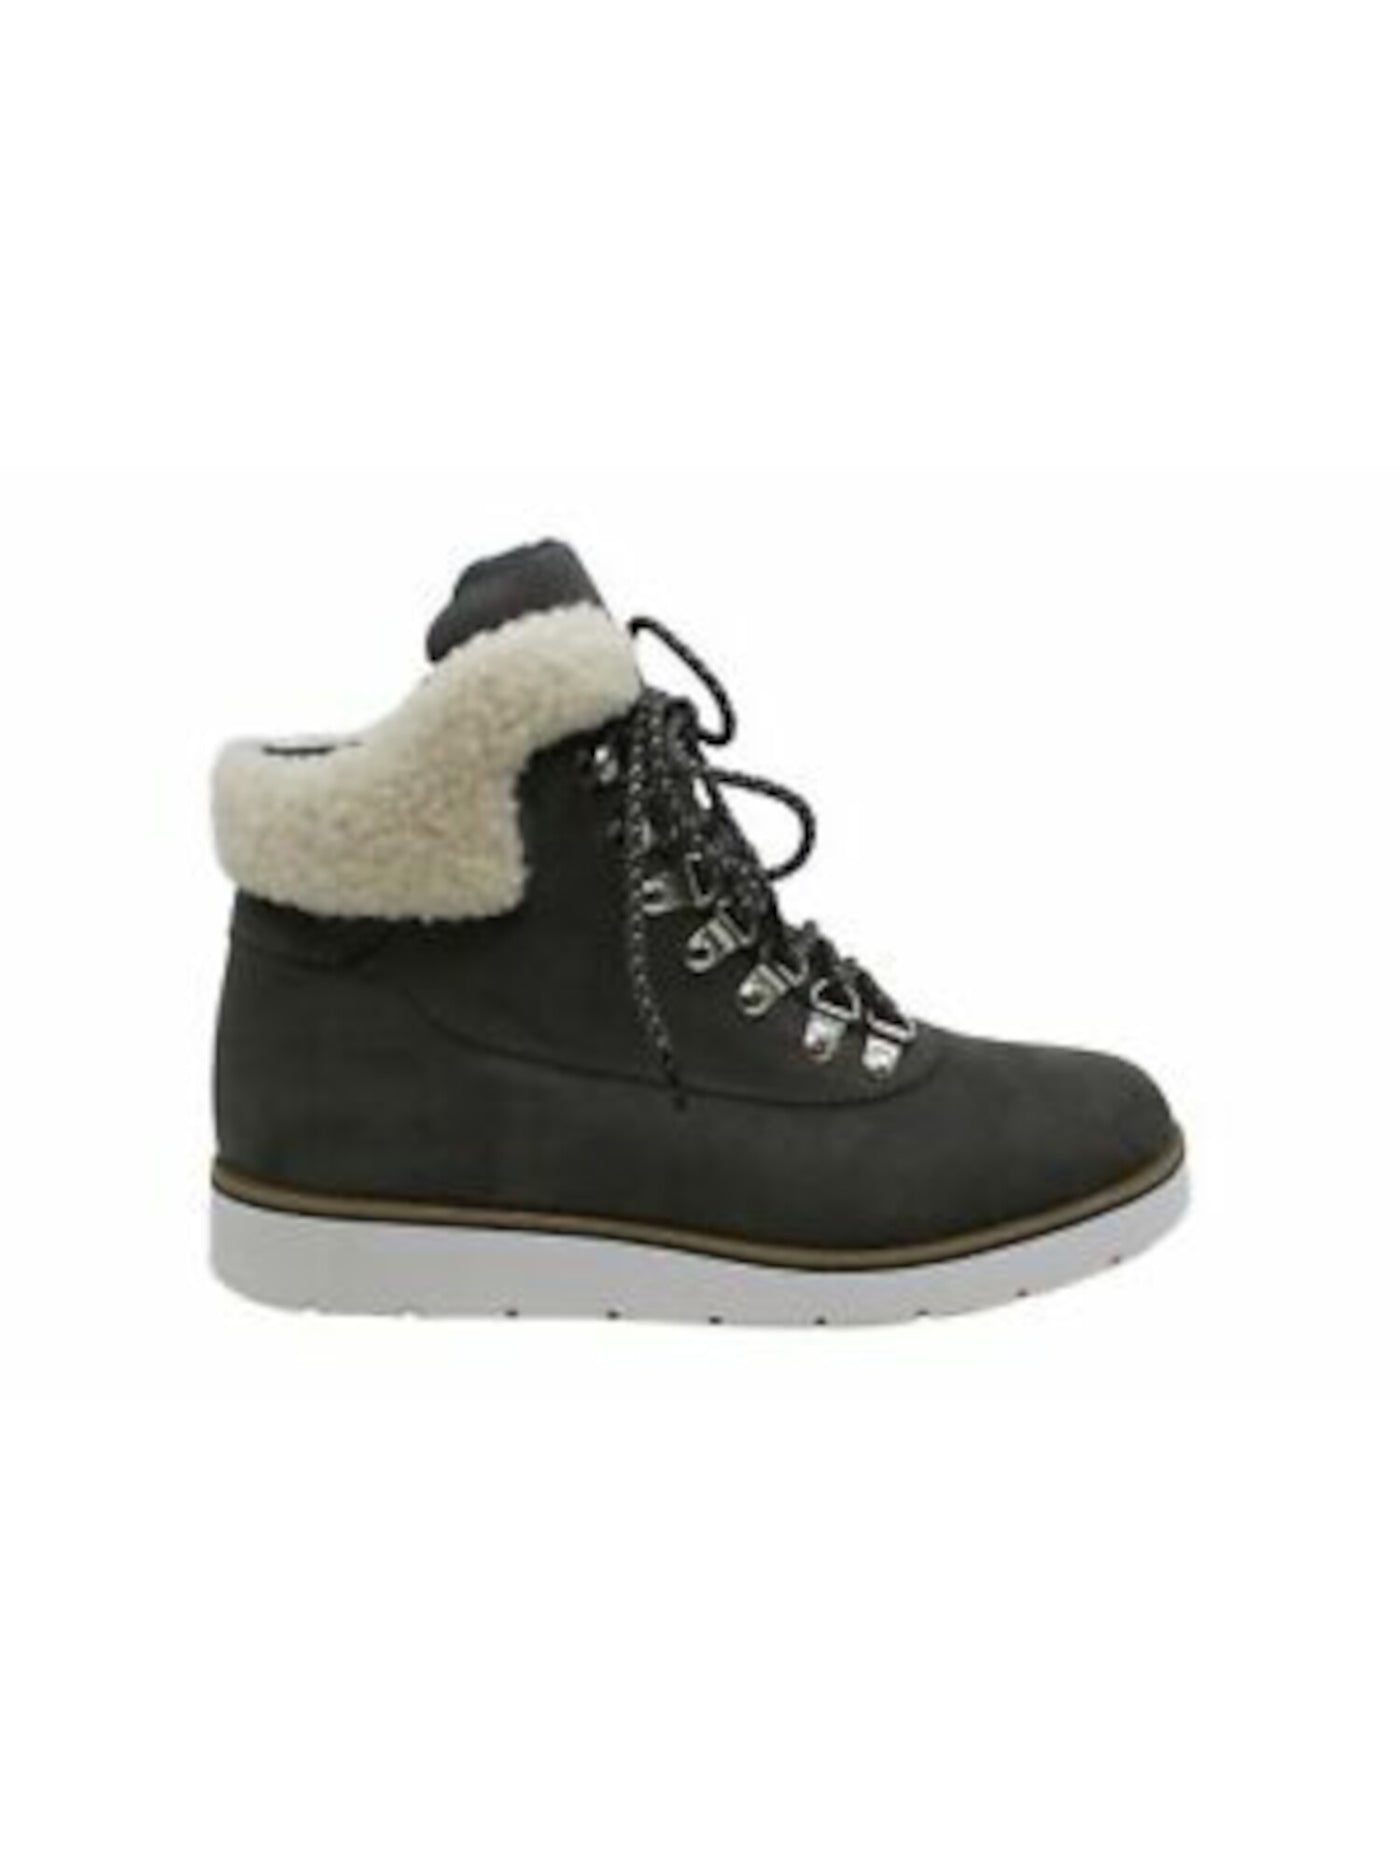 ESPRIT Womens Gray Hiker Booties, D Ring Hardware Wisdom Round Toe Wedge Lace-Up Booties 7.5